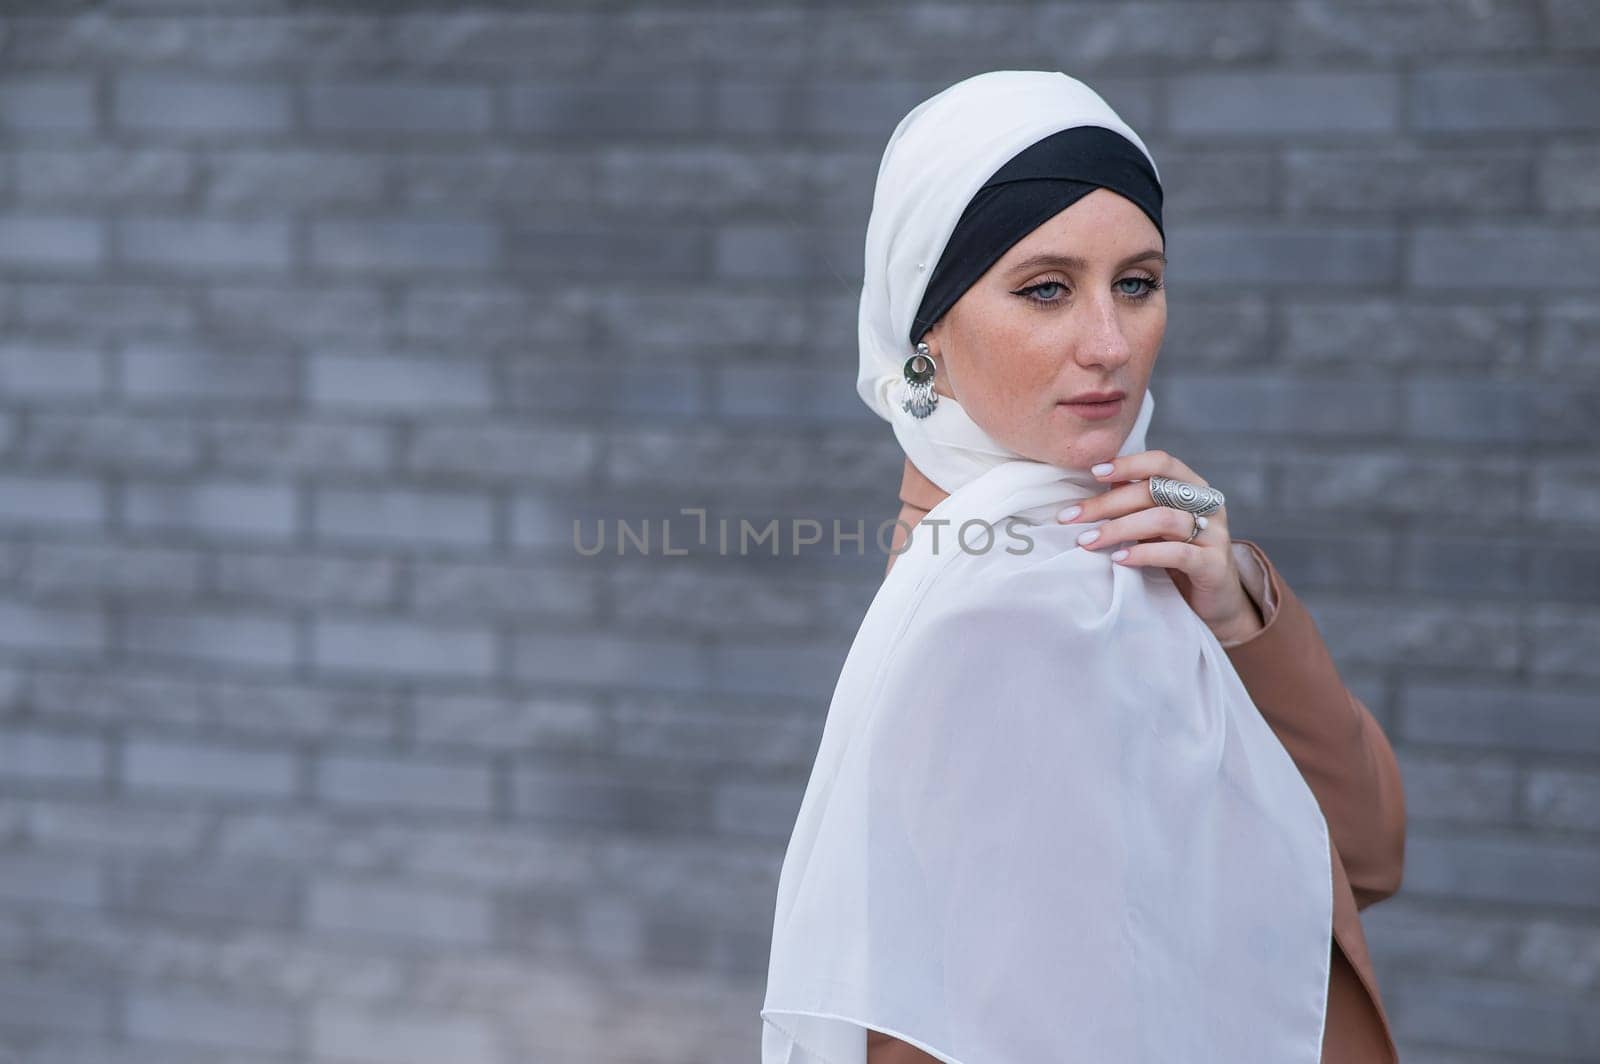 Portrait of a young blue-eyed woman in a hijab against a gray brick wall. A Muslim woman looks at the camera turning around